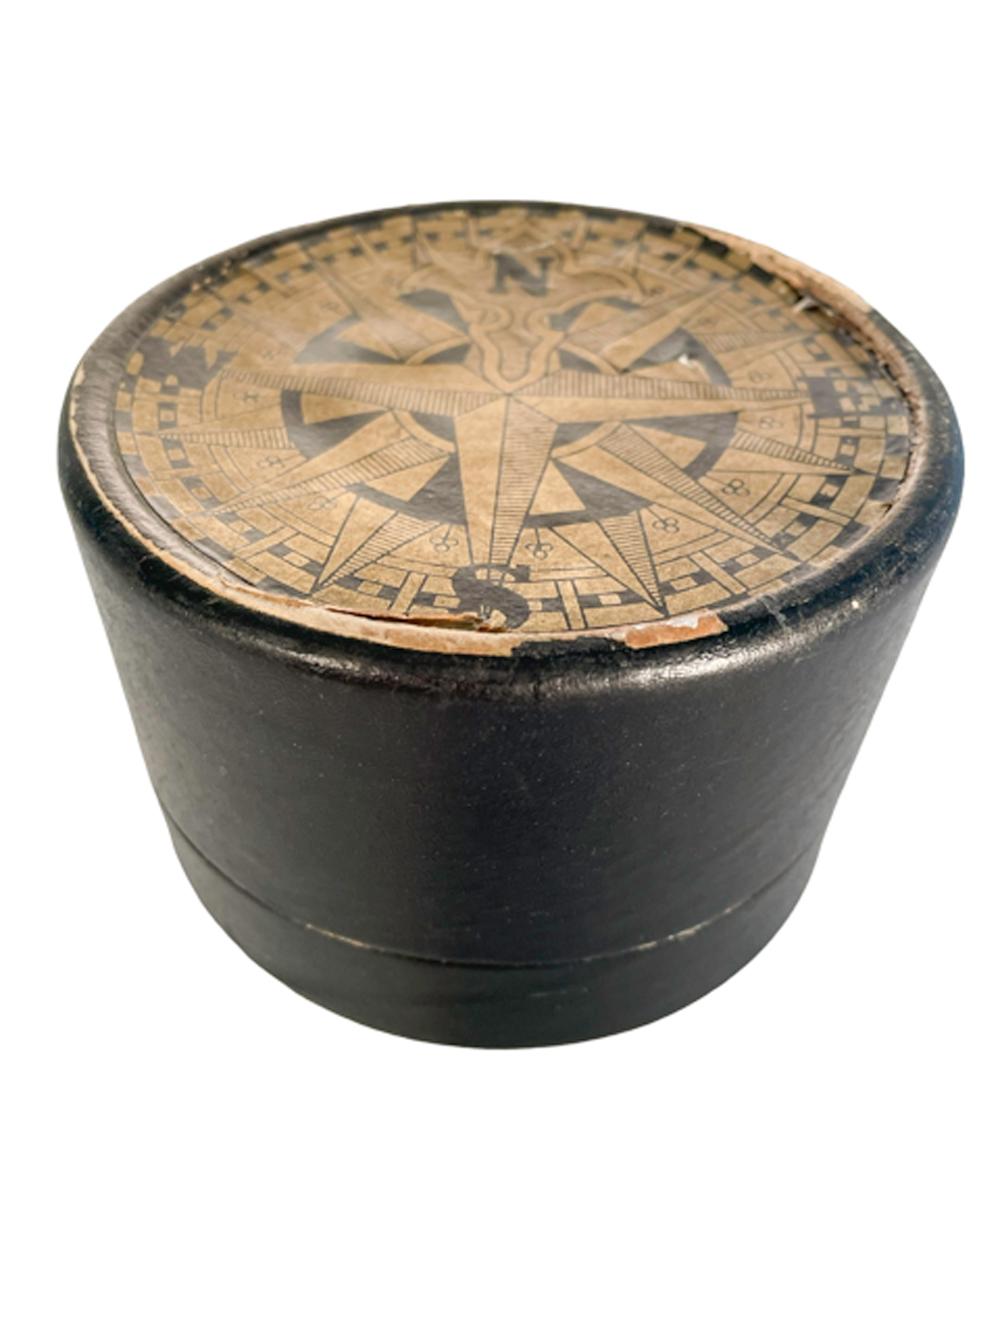 Mid-20th Century Porcelain Drink Coasters, Sailing Ships in Black W/Gold Accents For Sale 1